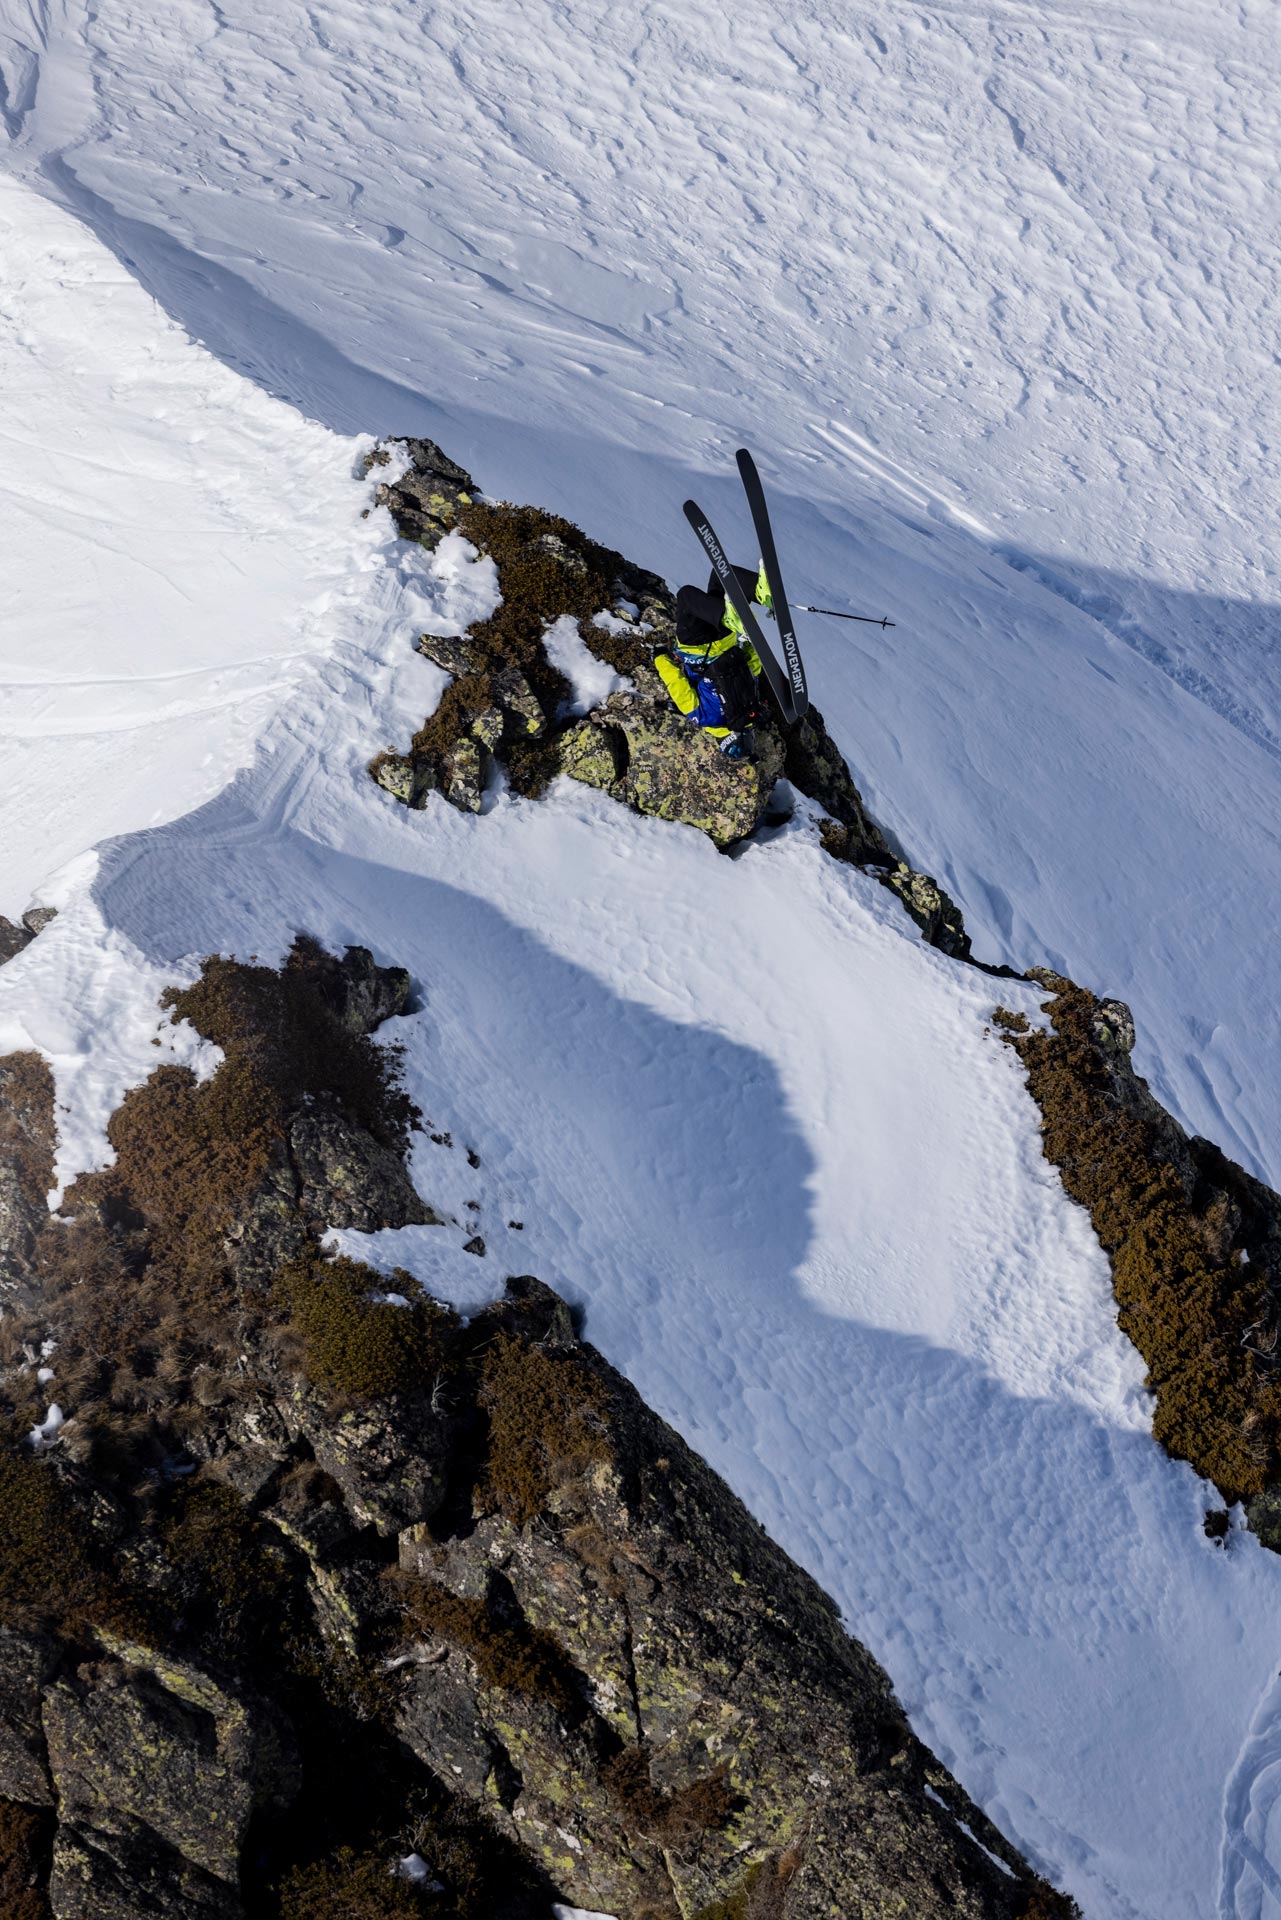 Maxime Chabloz sends a backflip during the 2022 Freeride World Tour event in Ordino Arcalis, Andorra